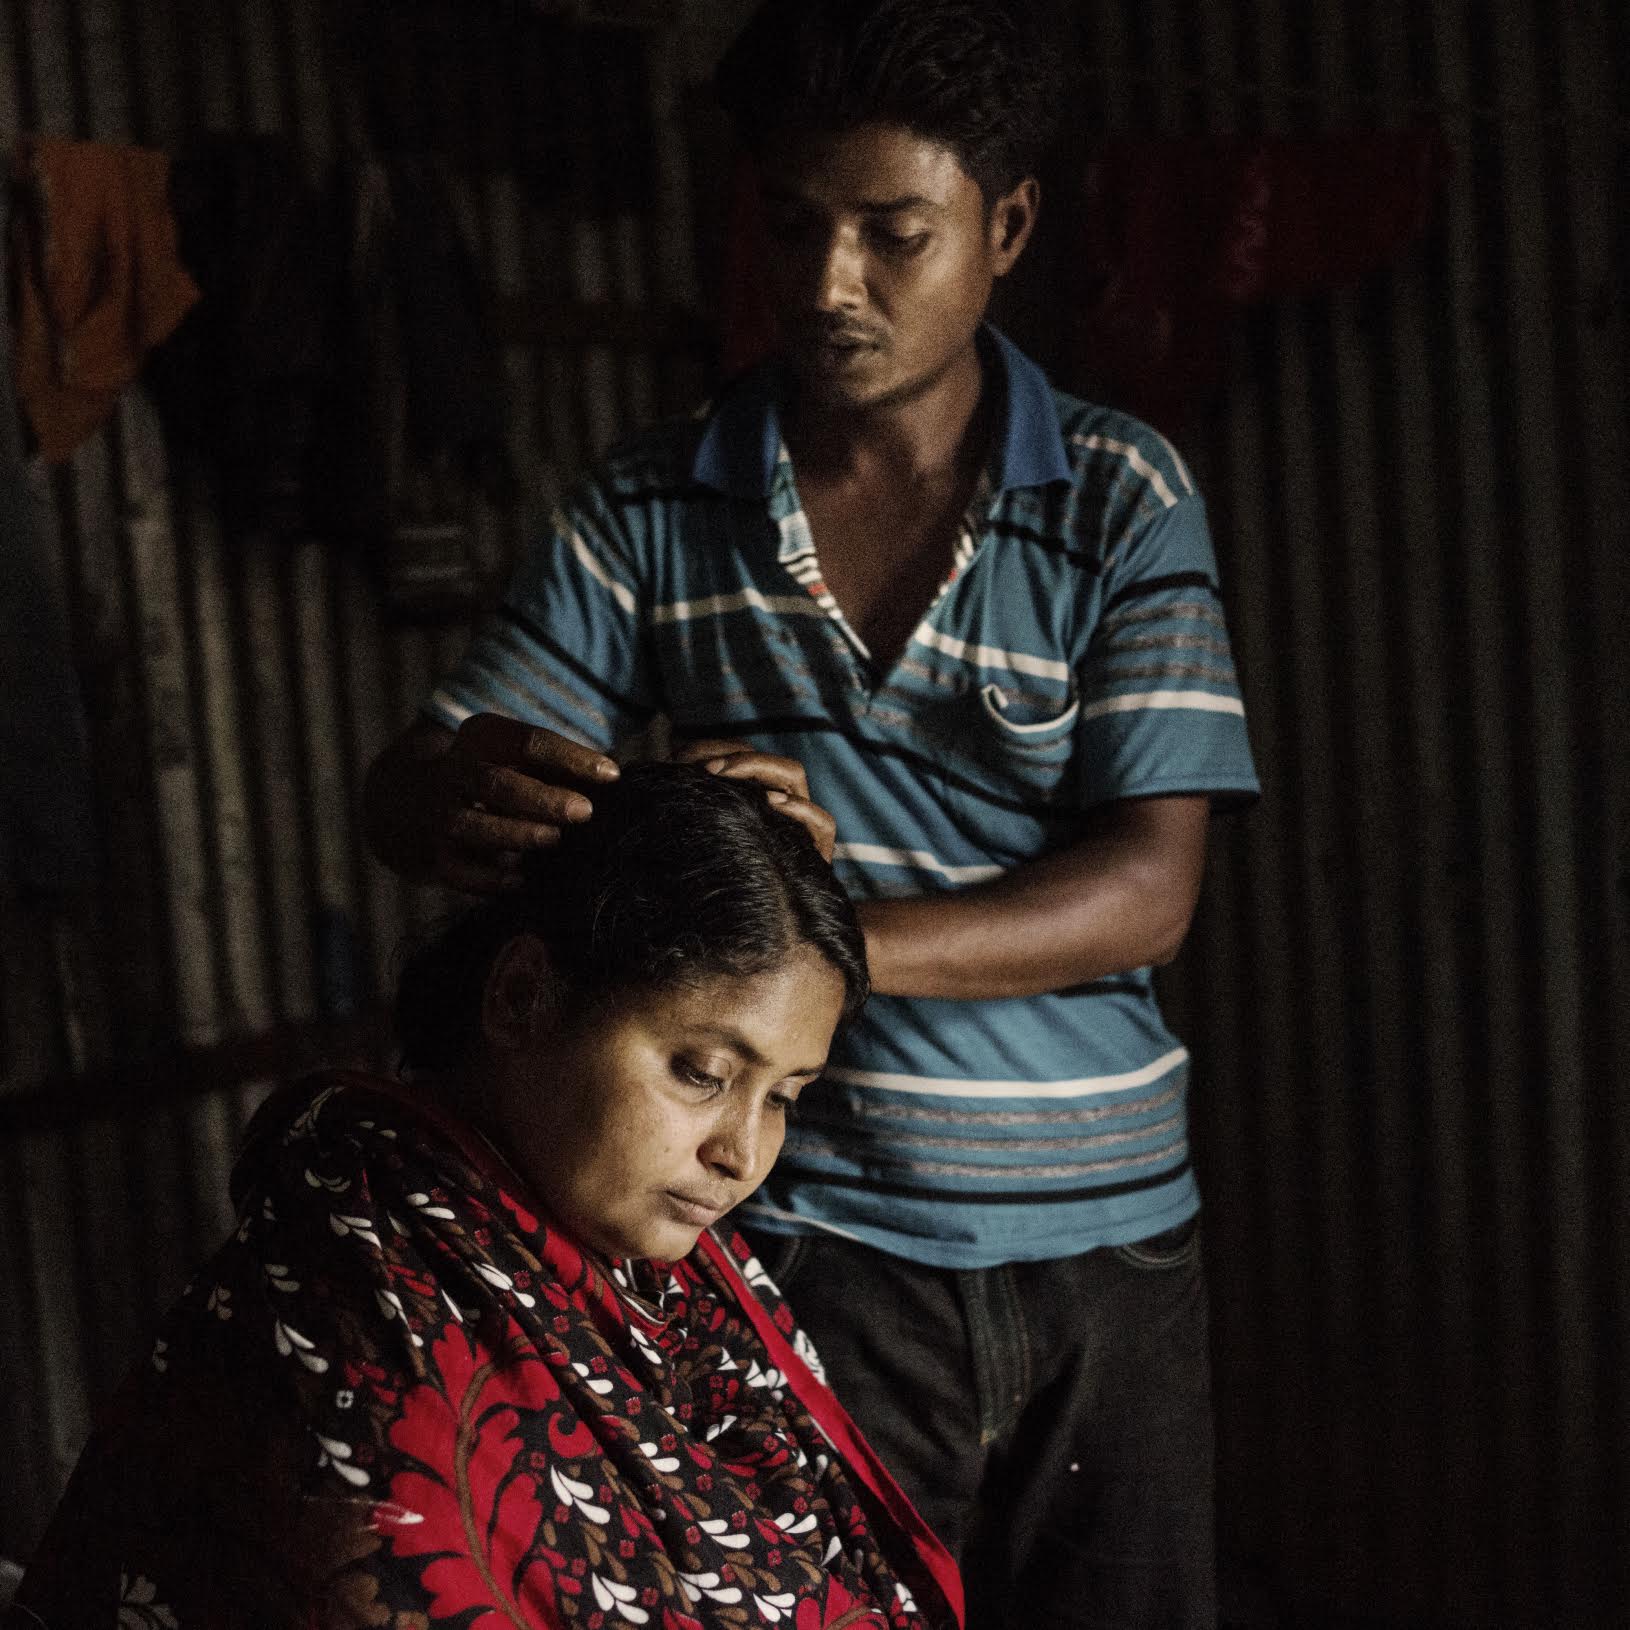 Mominul Islam and his wife Sharvanu. Mominul thought his wife died in the Rana Plaza collapse, only to find out that she was in critical condition at the Dhaka Medical College hospital.